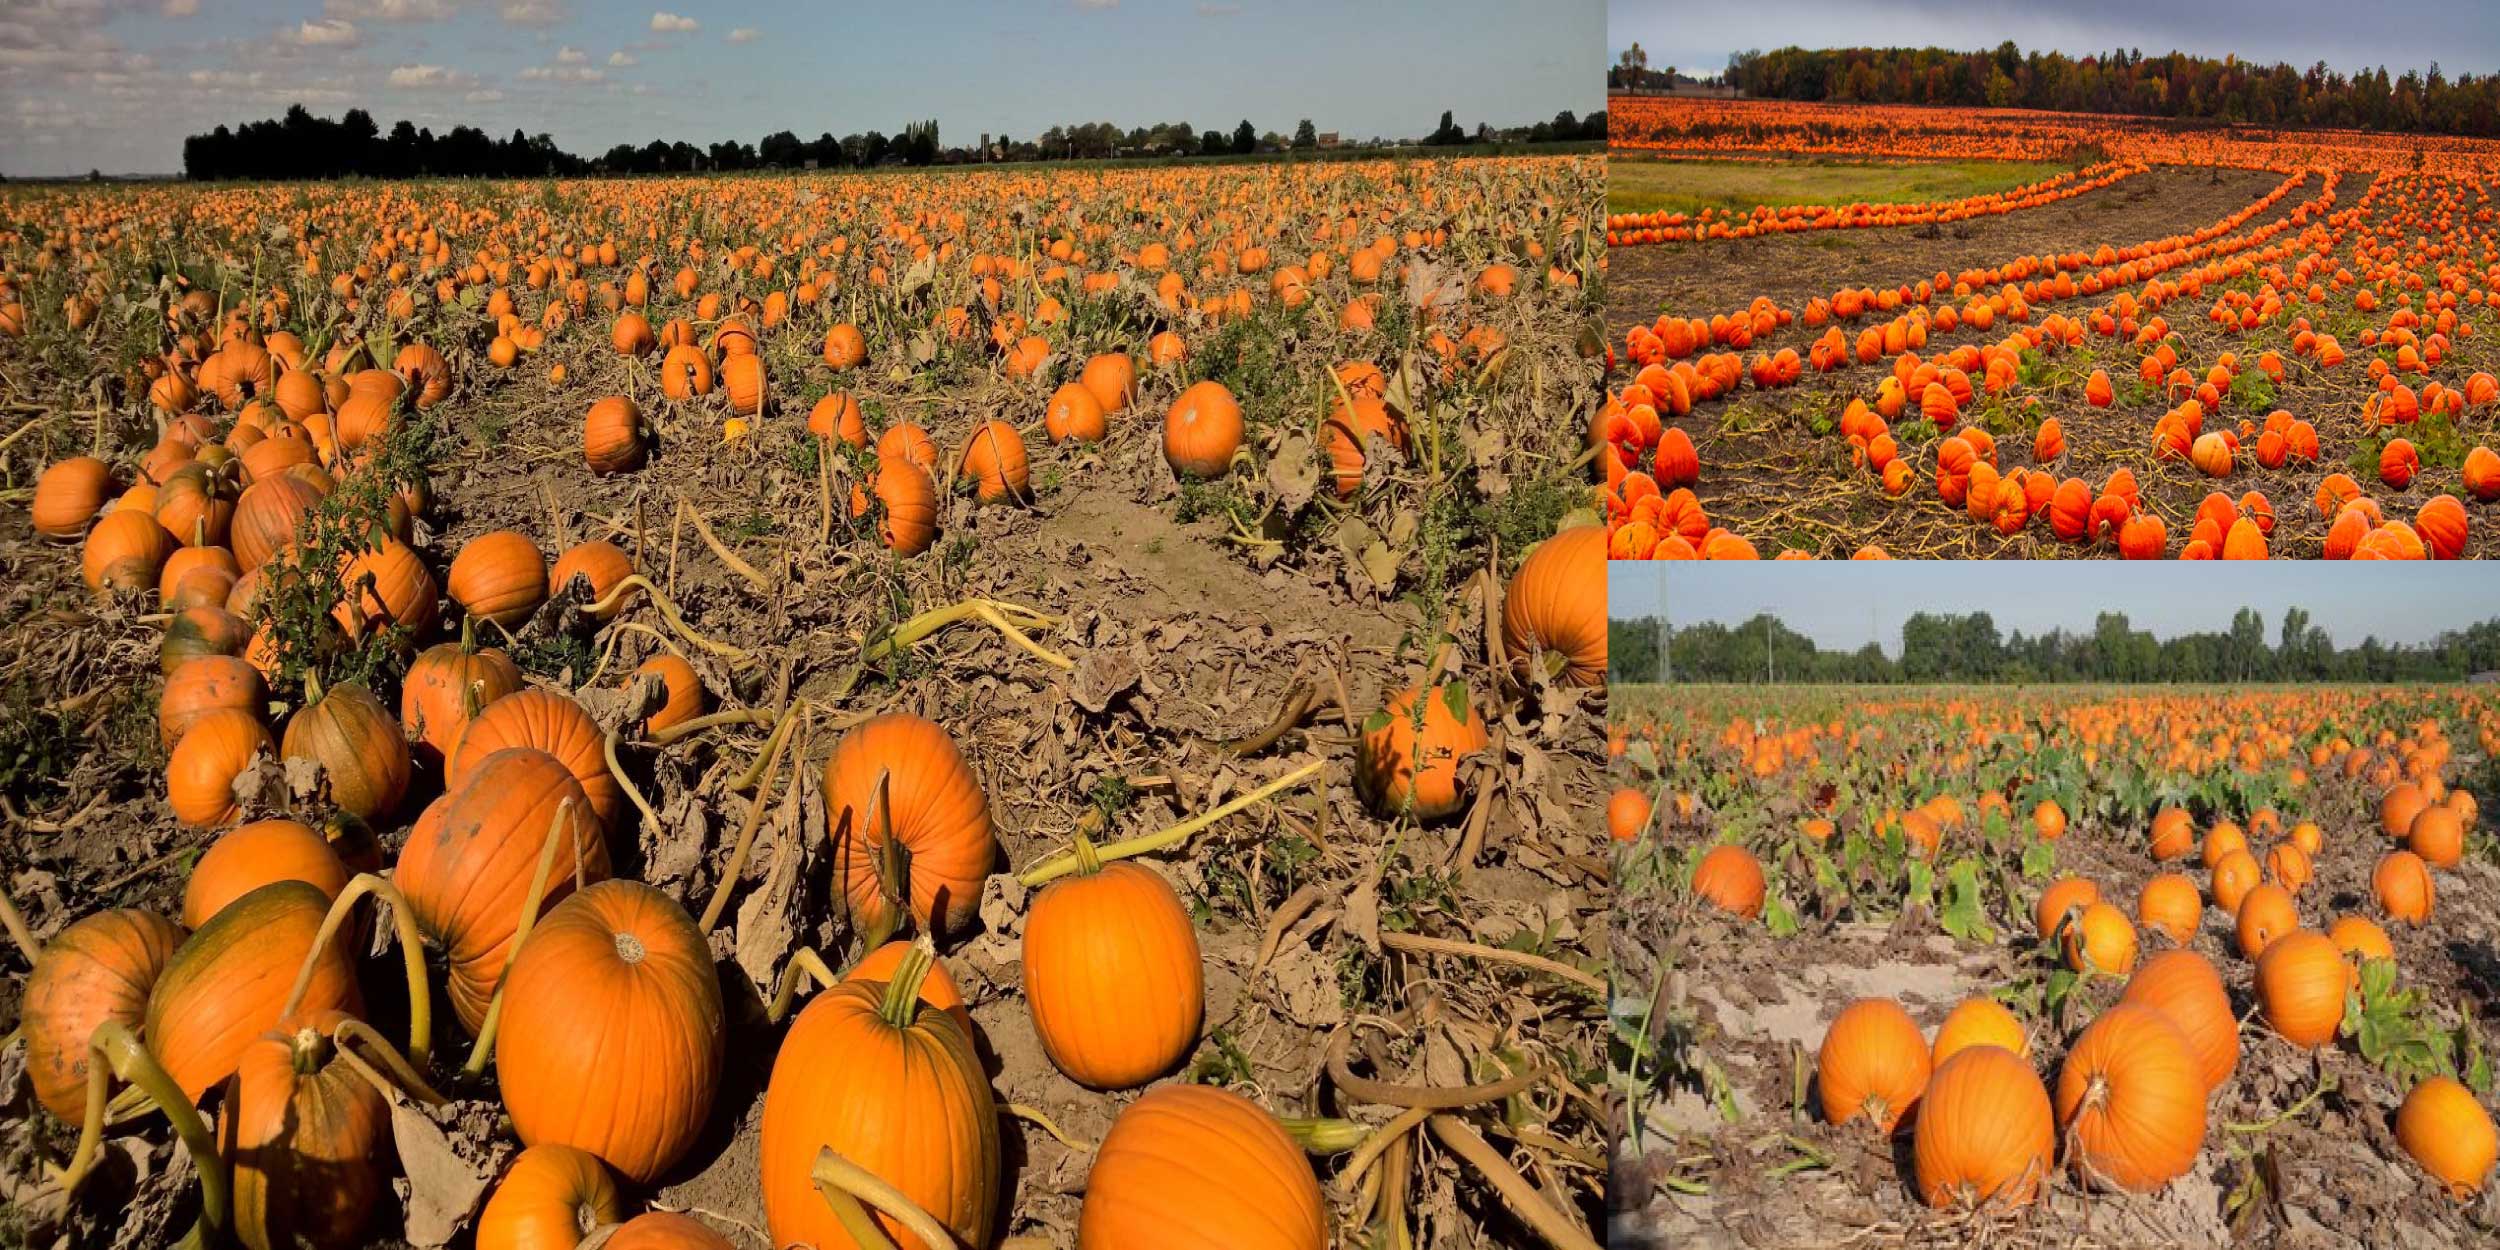 Best things to do in California - Pumpkins growing at a farm in Half Moon Bay